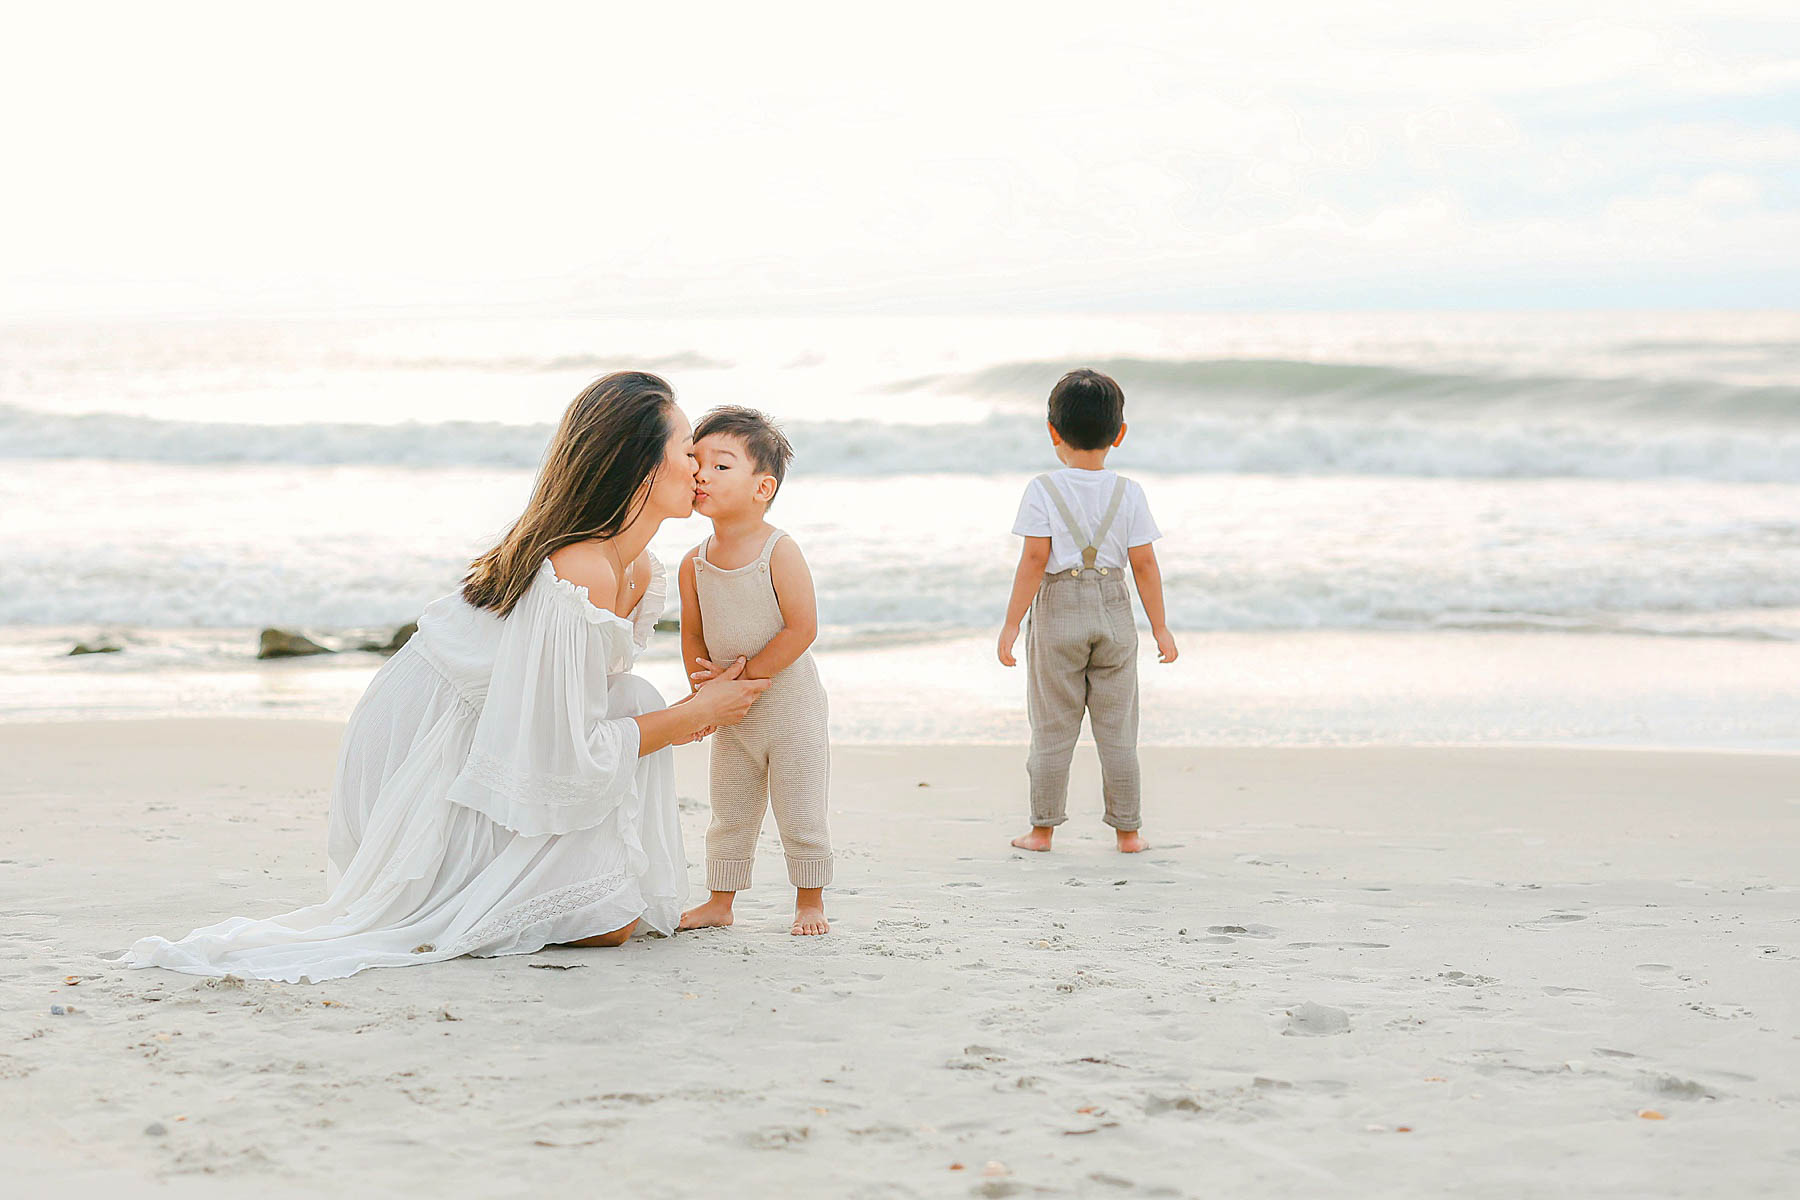 mom kissing baby boy on the beach wearing white dress